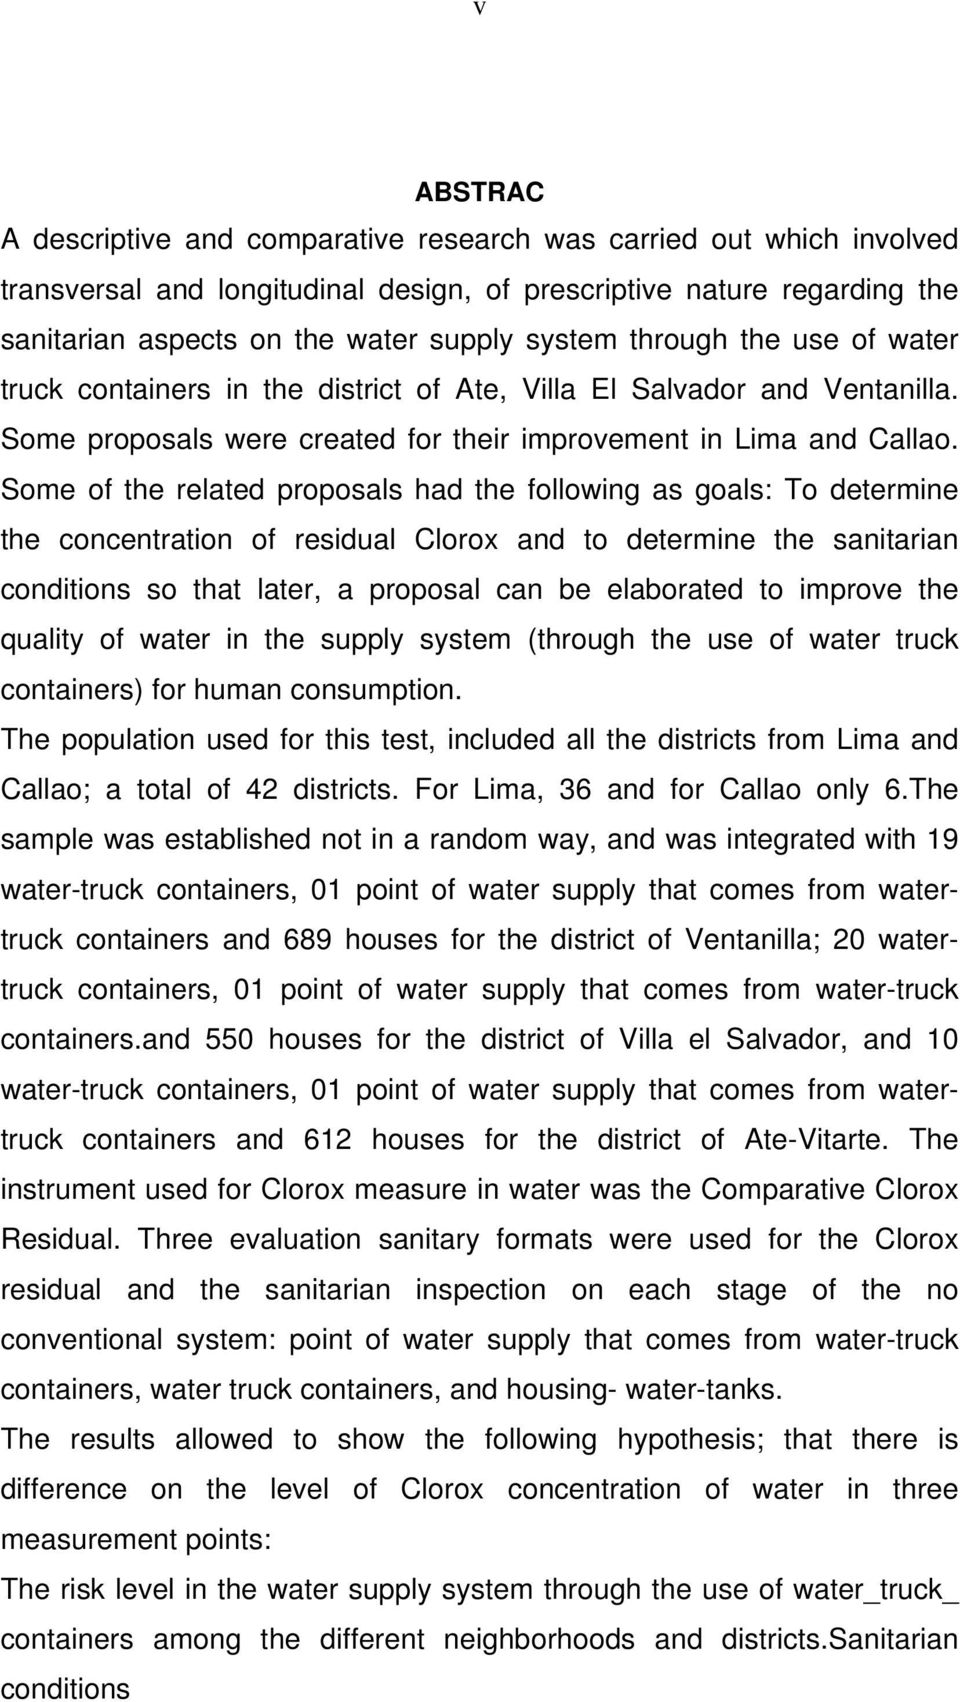 Some of the related proposals had the following as goals: To determine the concentration of residual Clorox and to determine the sanitarian conditions so that later, a proposal can be elaborated to